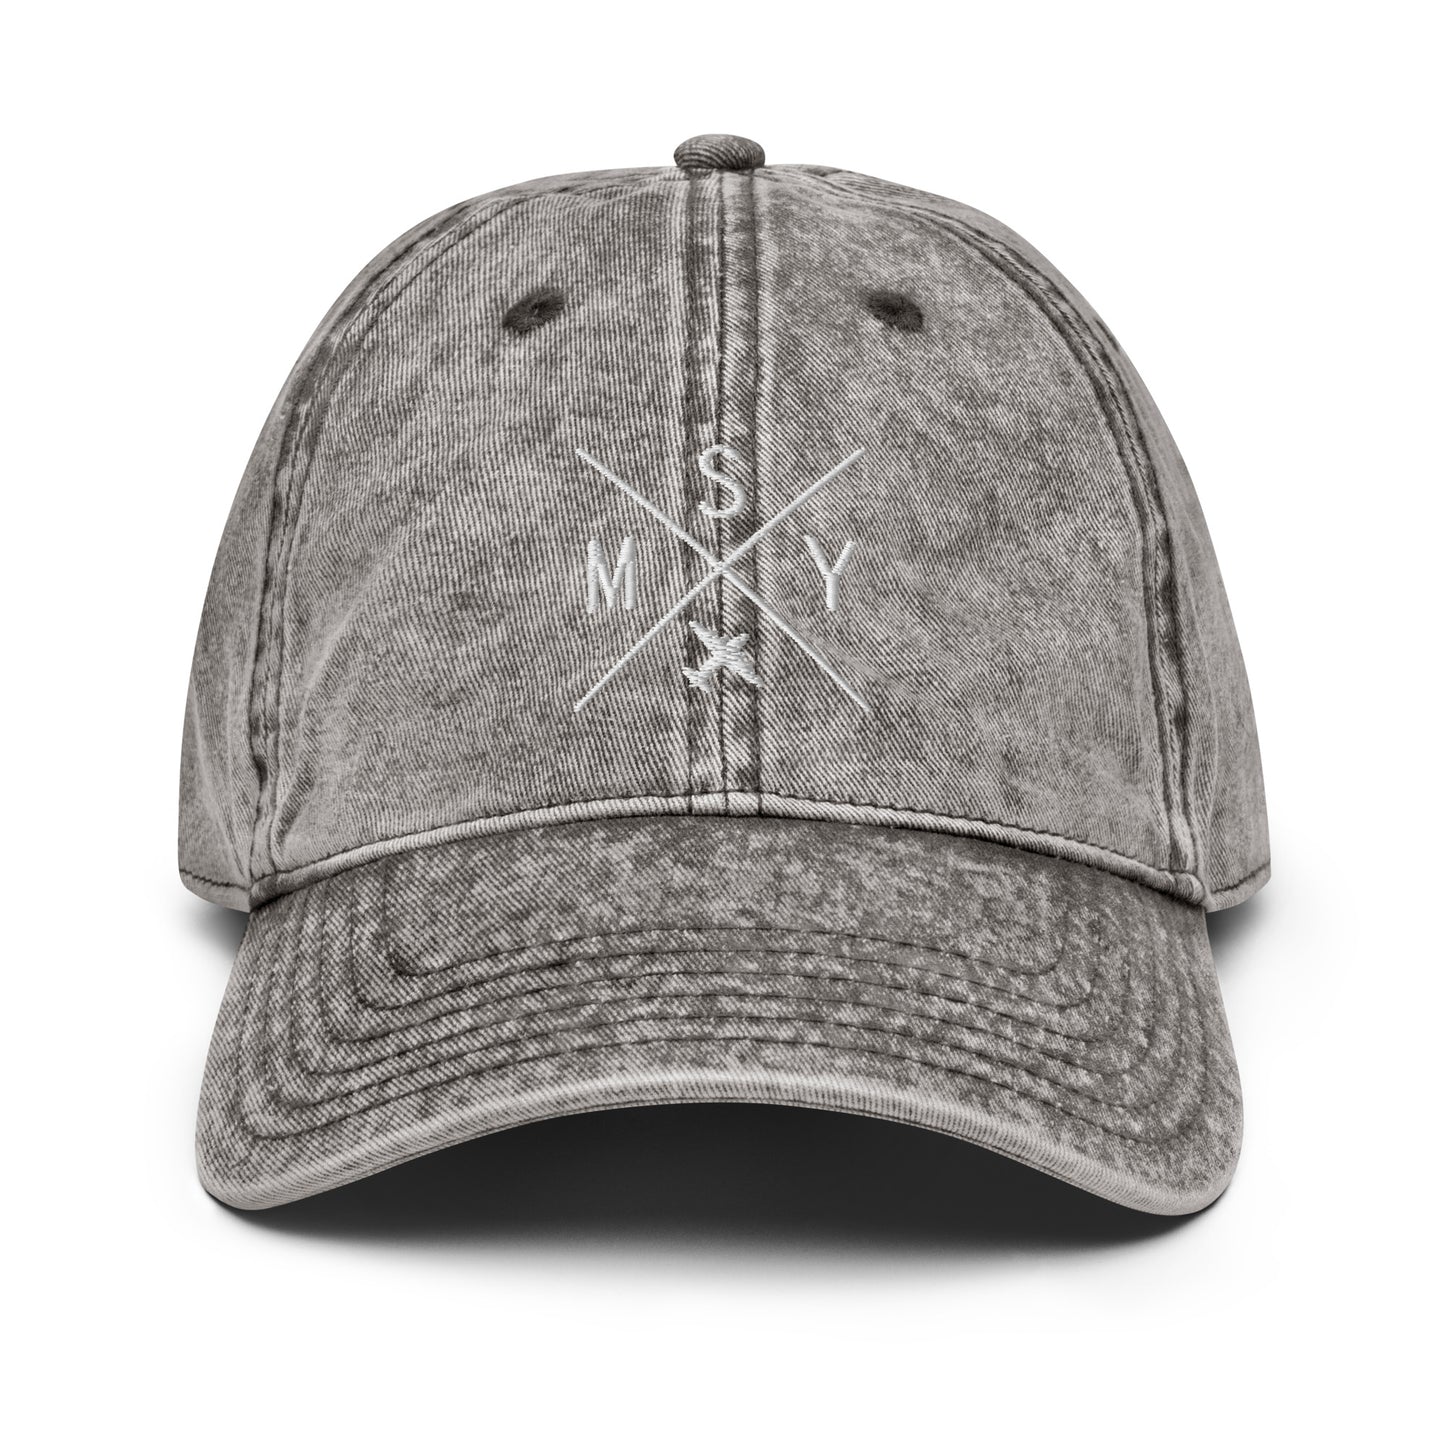 Crossed-X Cotton Twill Cap - White • MSY New Orleans • YHM Designs - Image 30